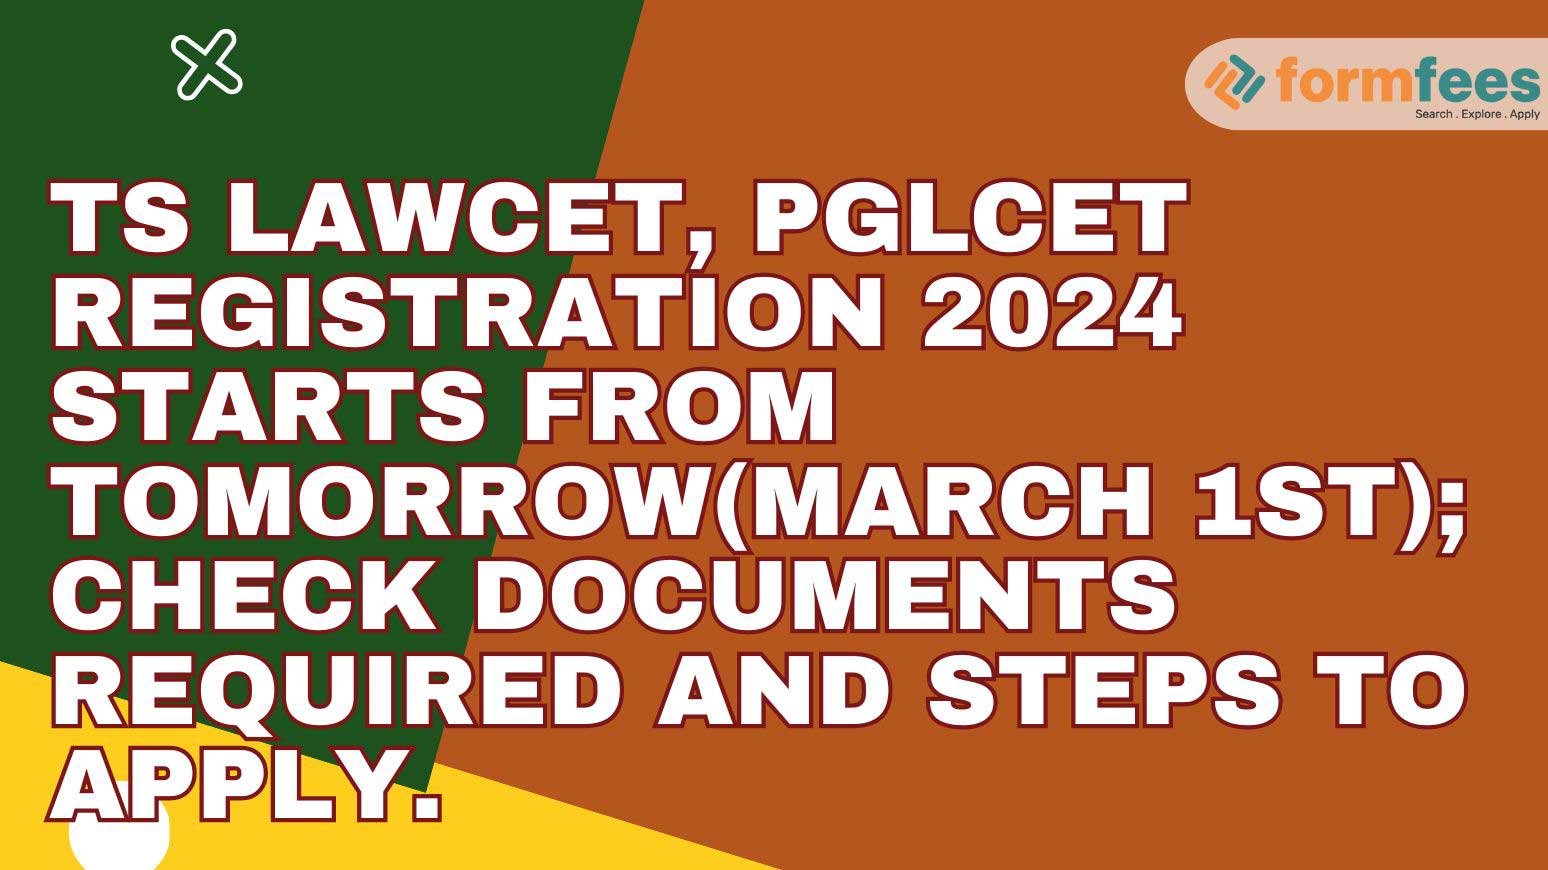 TS LAWCET, PGLCET Registration 2024 Starts from Tomorrow(March 1st); Check Documents Required and Steps to Apply.